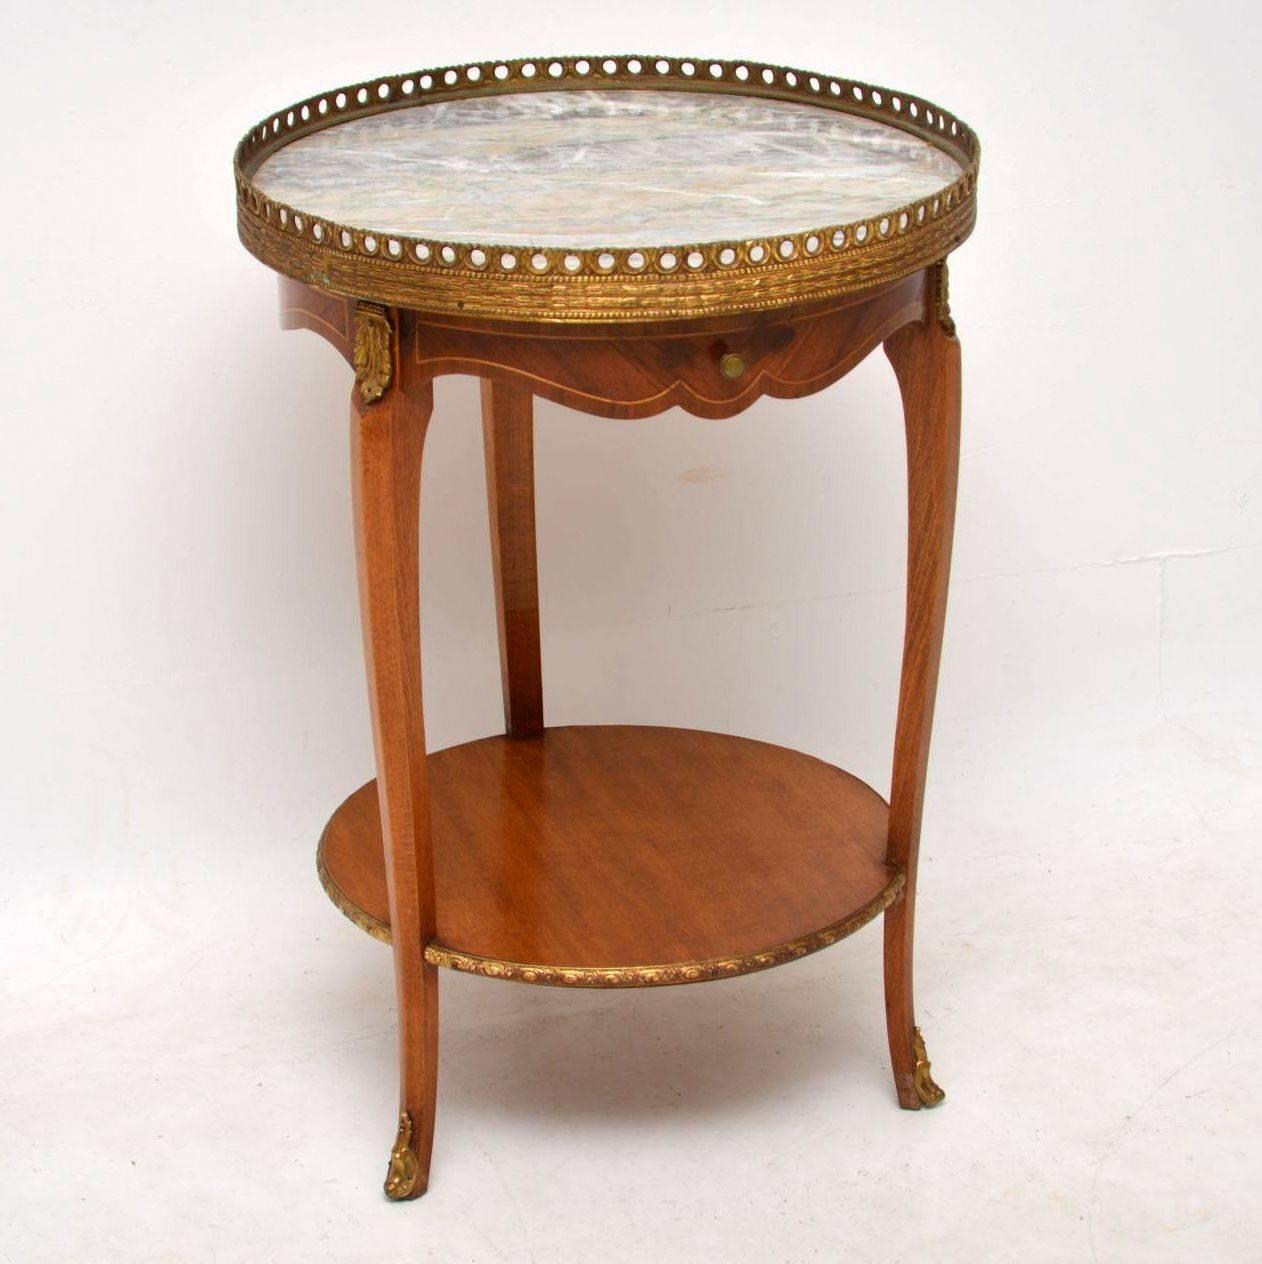 Small antique French marble-top side table in good condition and dating from around the 1910s-1920s period. The marble top is surrounded by a gilt metal gallery with a drawer below. The drawer and the rest of the shaped sides are kingwood with